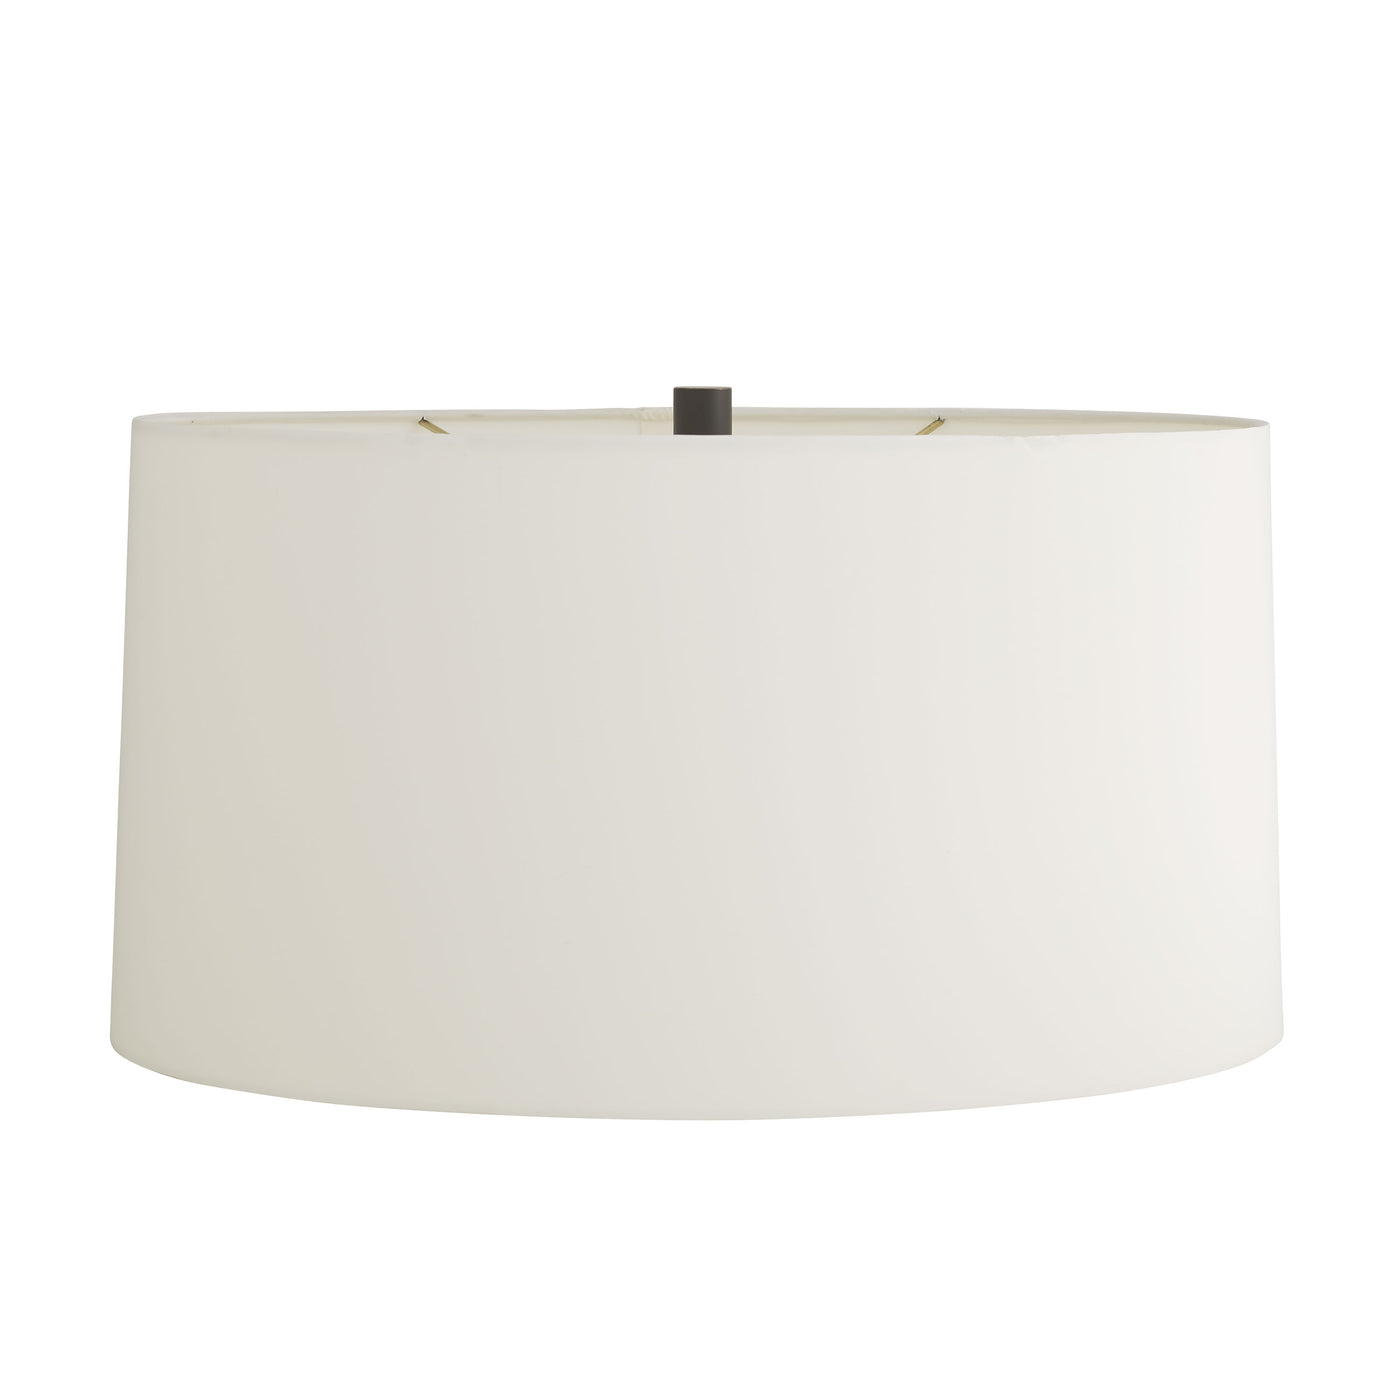 TABLE LAMP IVORY ORIGAMI RICESTONE